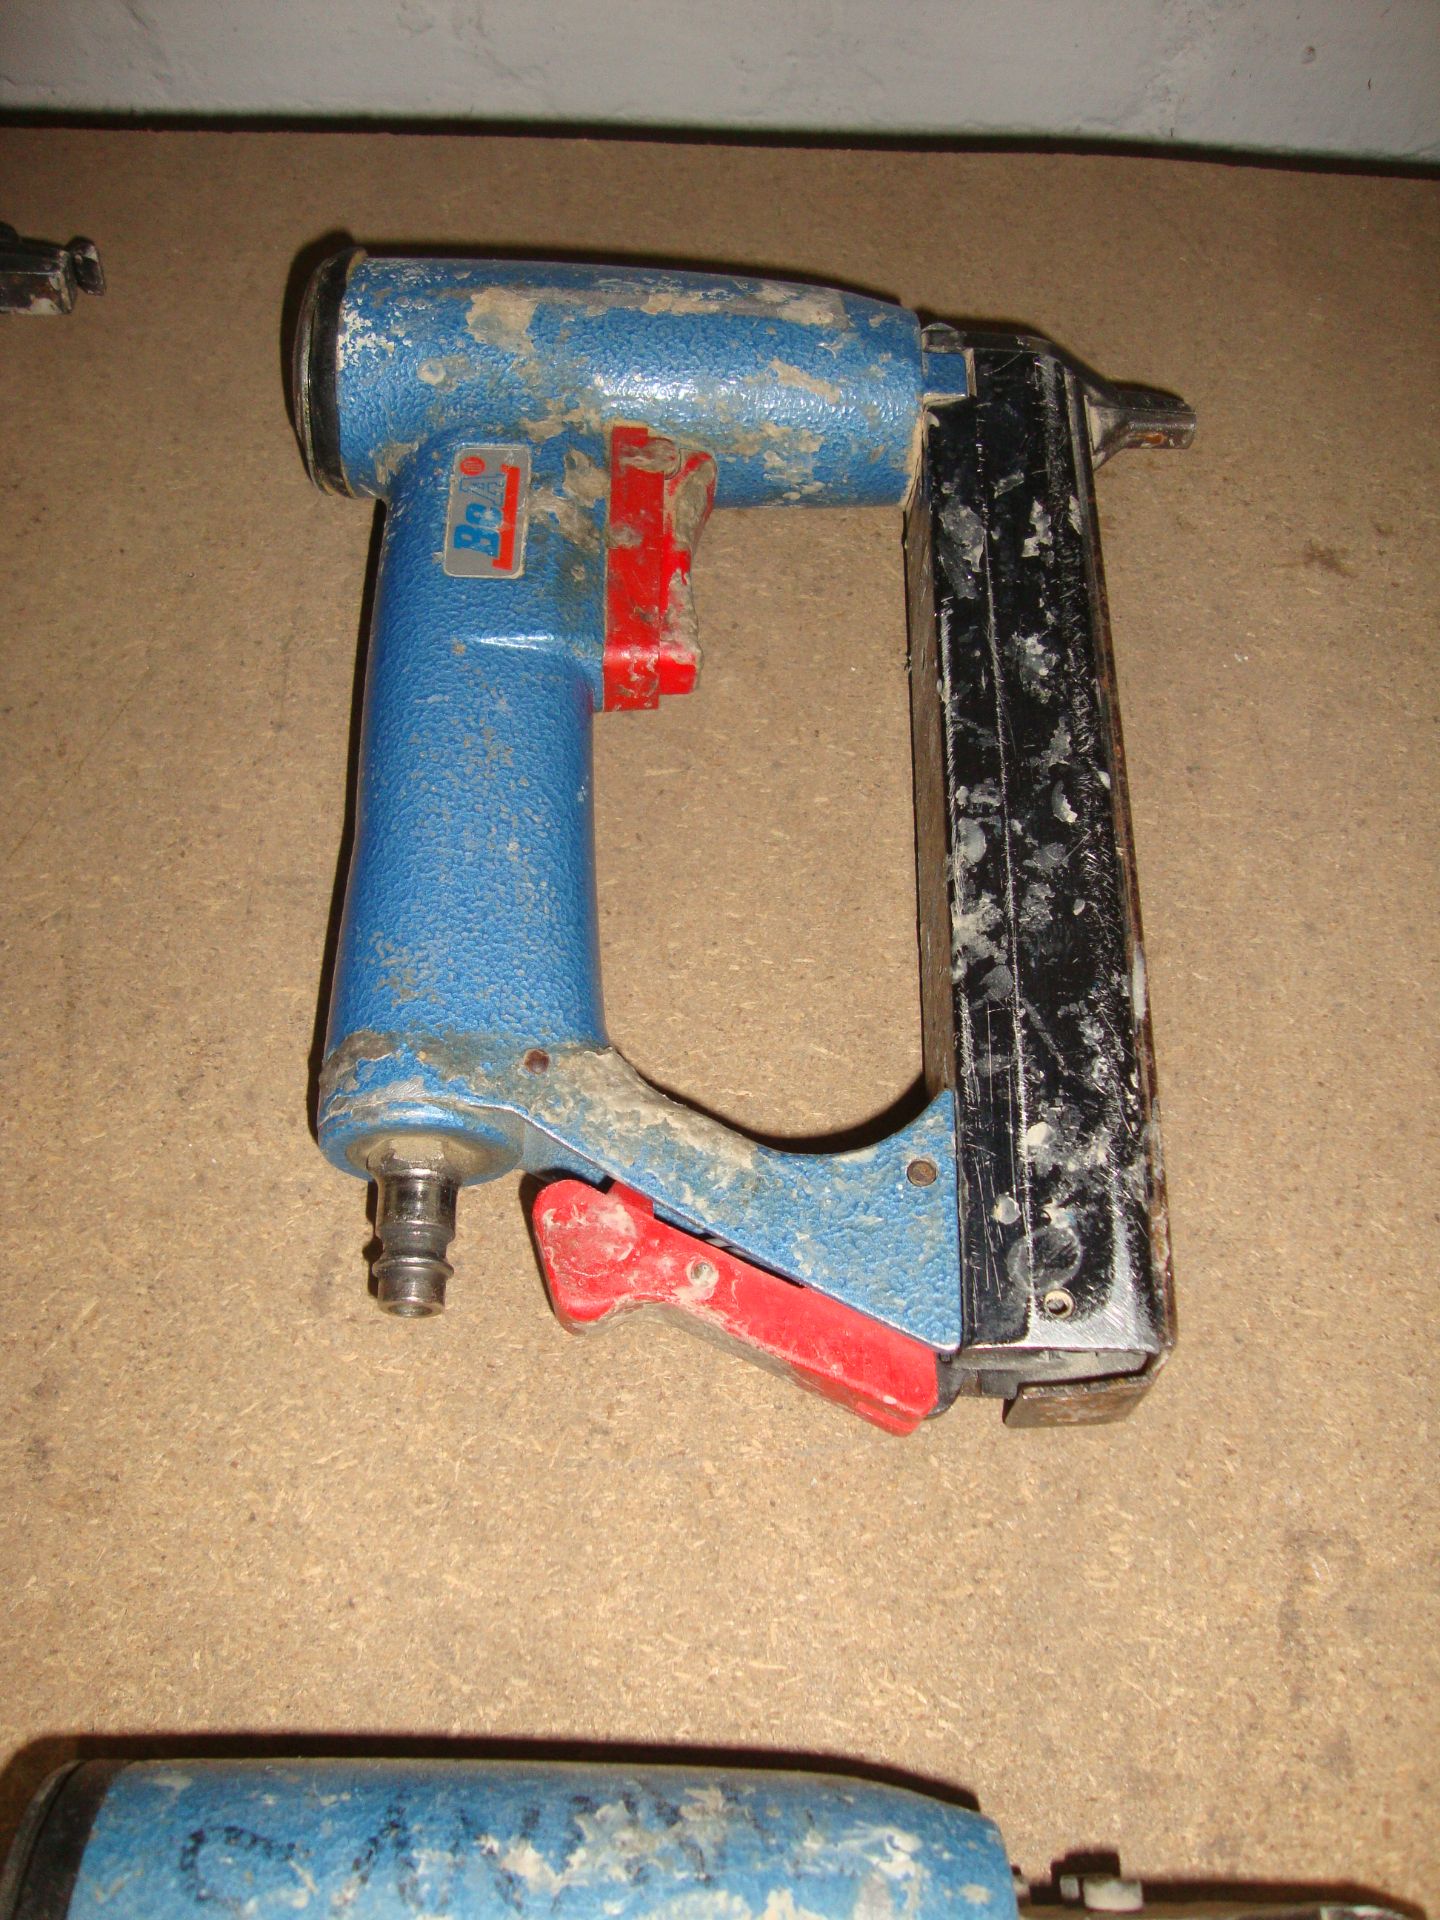 2 off BeA air nailers IMPORTANT: Please remember goods successfully bid upon must be paid for and - Image 2 of 2